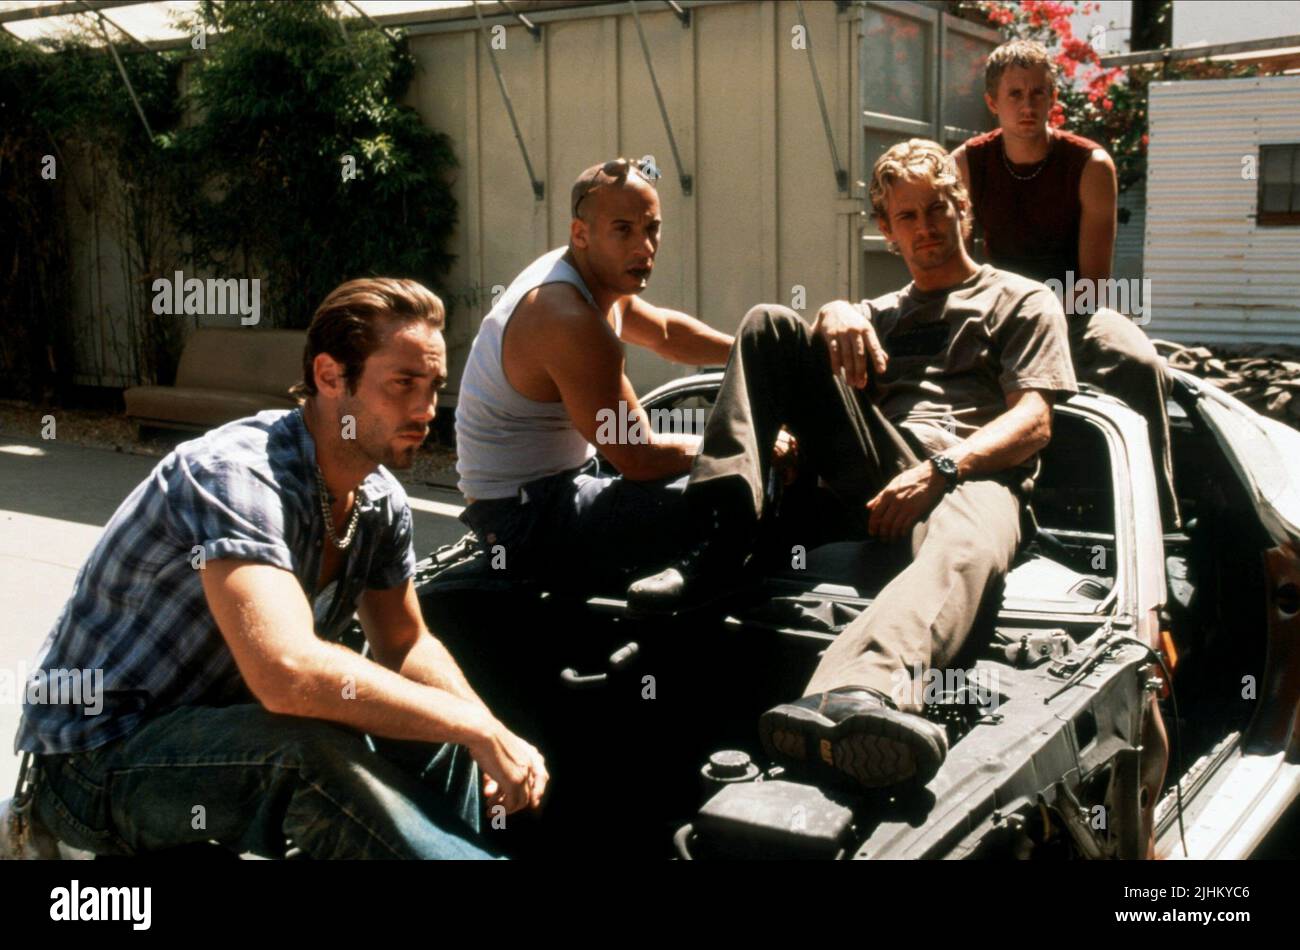 JOHNNY STRONG, VIN DIESEL, PAUL WALKER, CHAD LINDBERG, THE FAST AND THE FURIOUS, 2001 Stock Photo